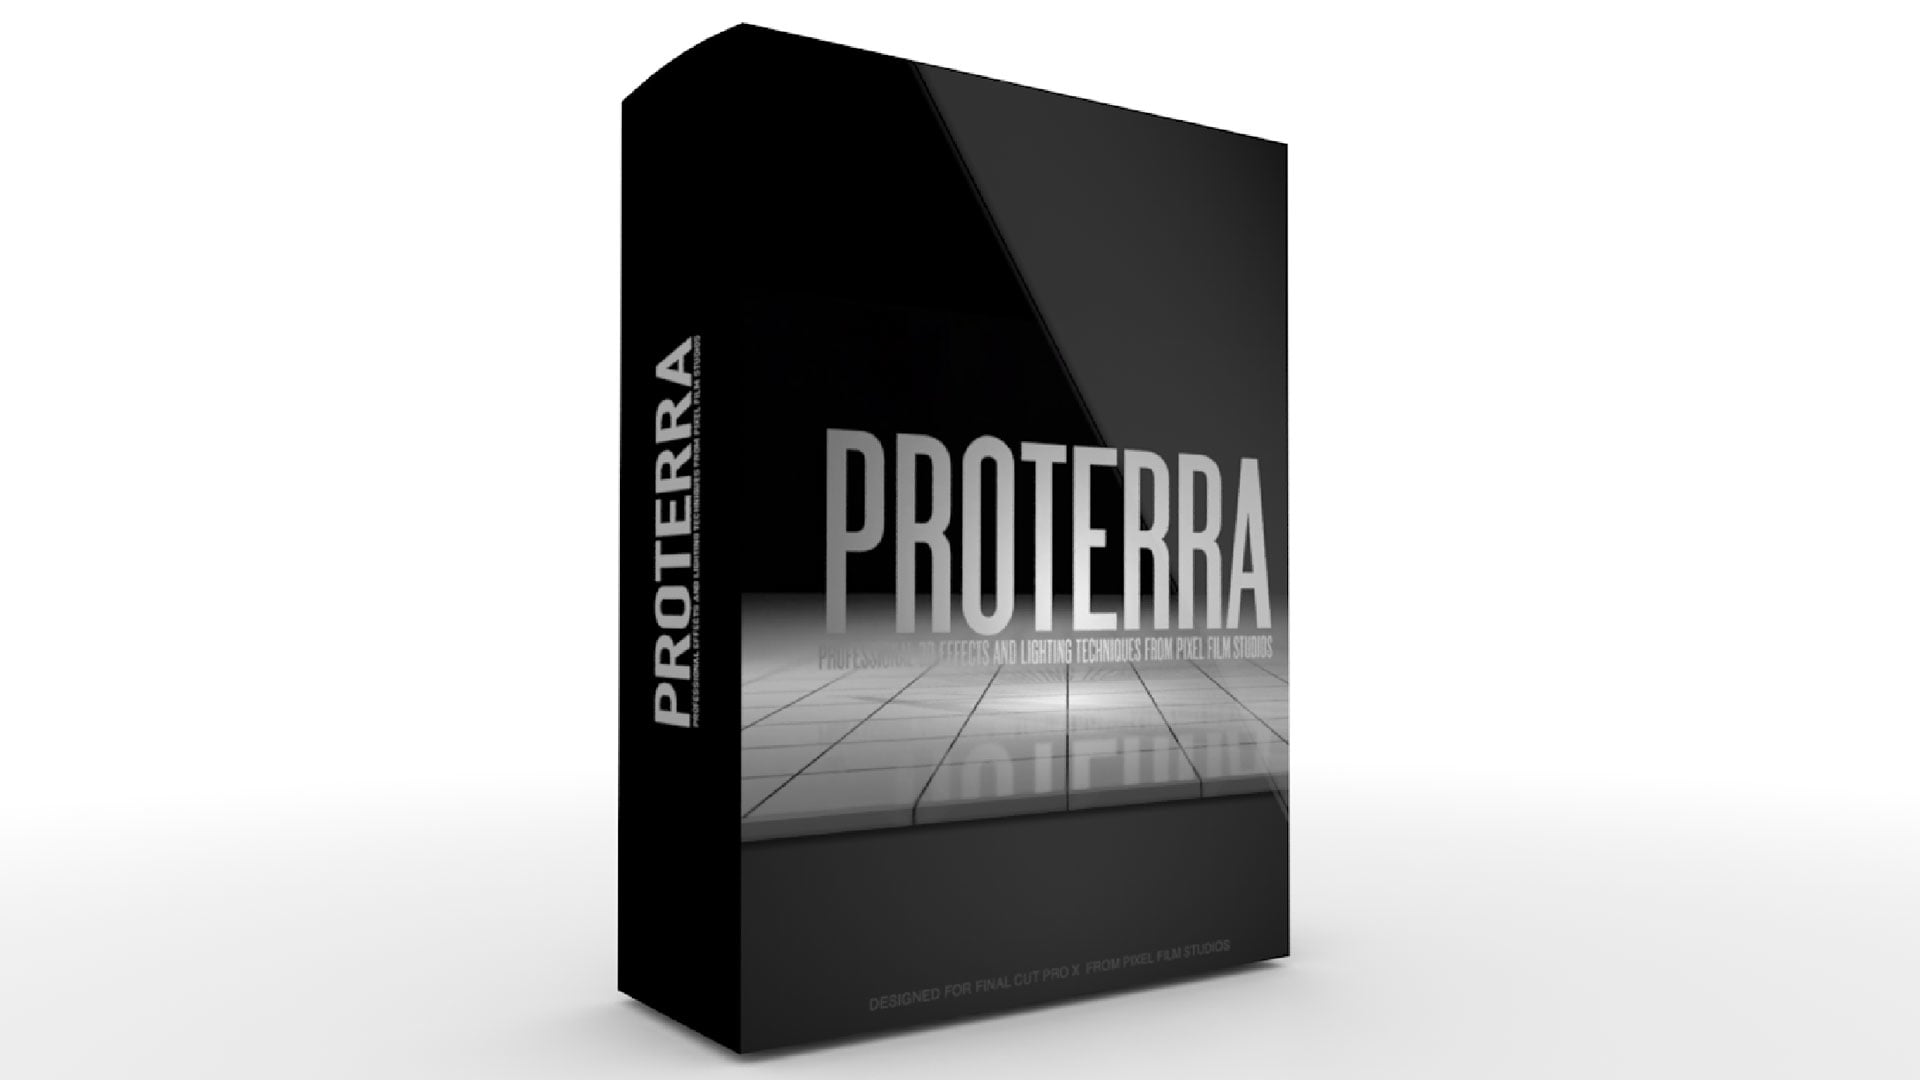 final-cut-pro-x-plugins-and-effects-proterra-professional-3d